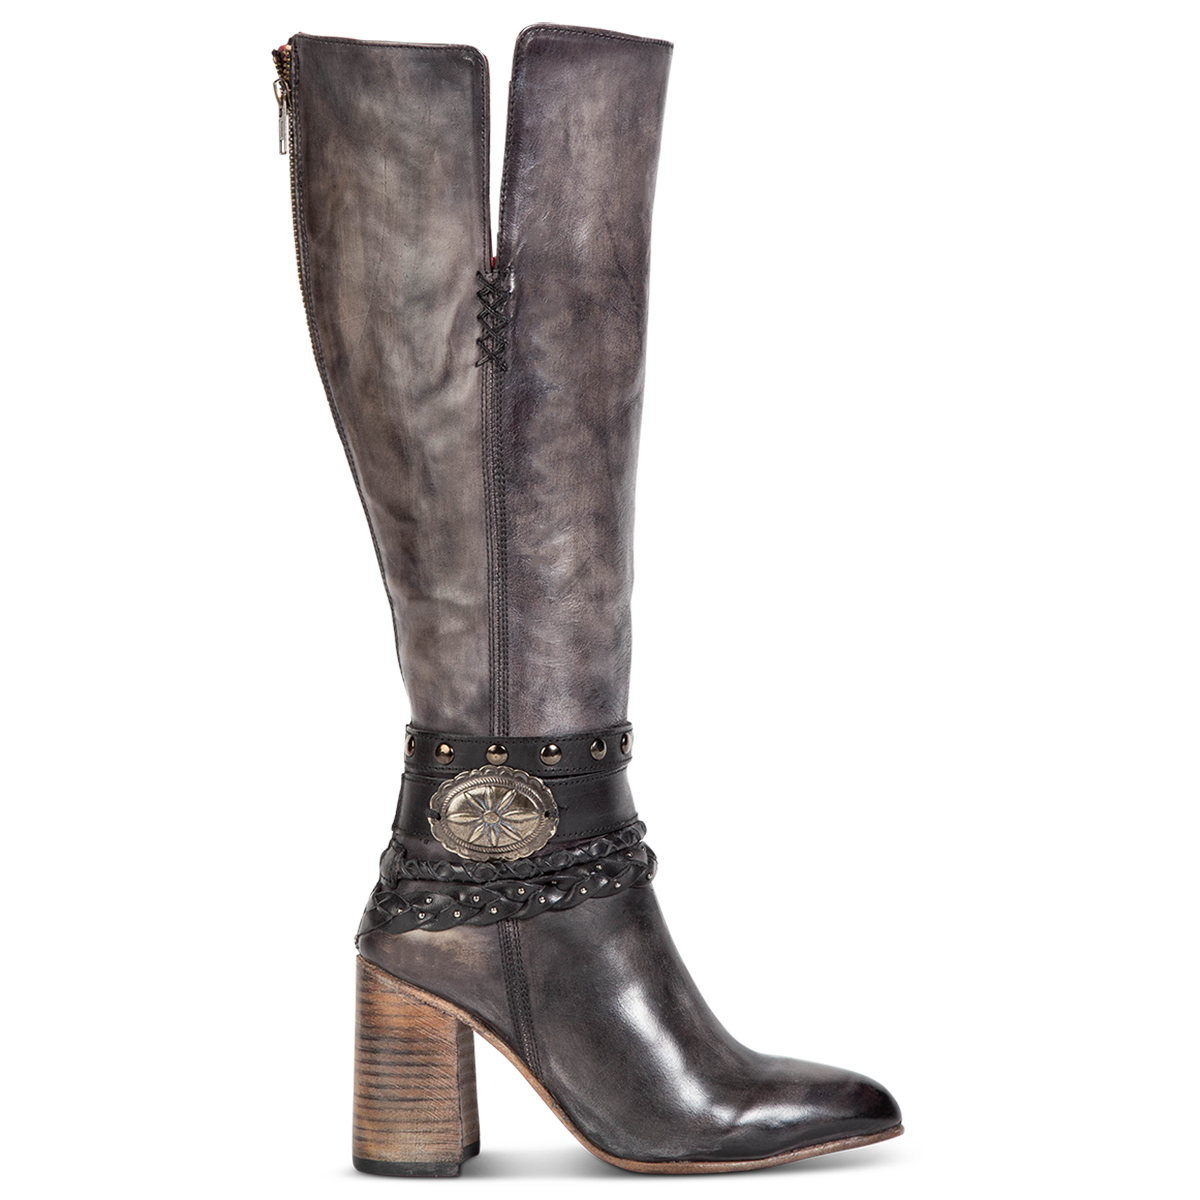 FREEBIRD women's Juniper black heeled boot featuring a pointed toe, back zip closure, and braided and studded ankle straps